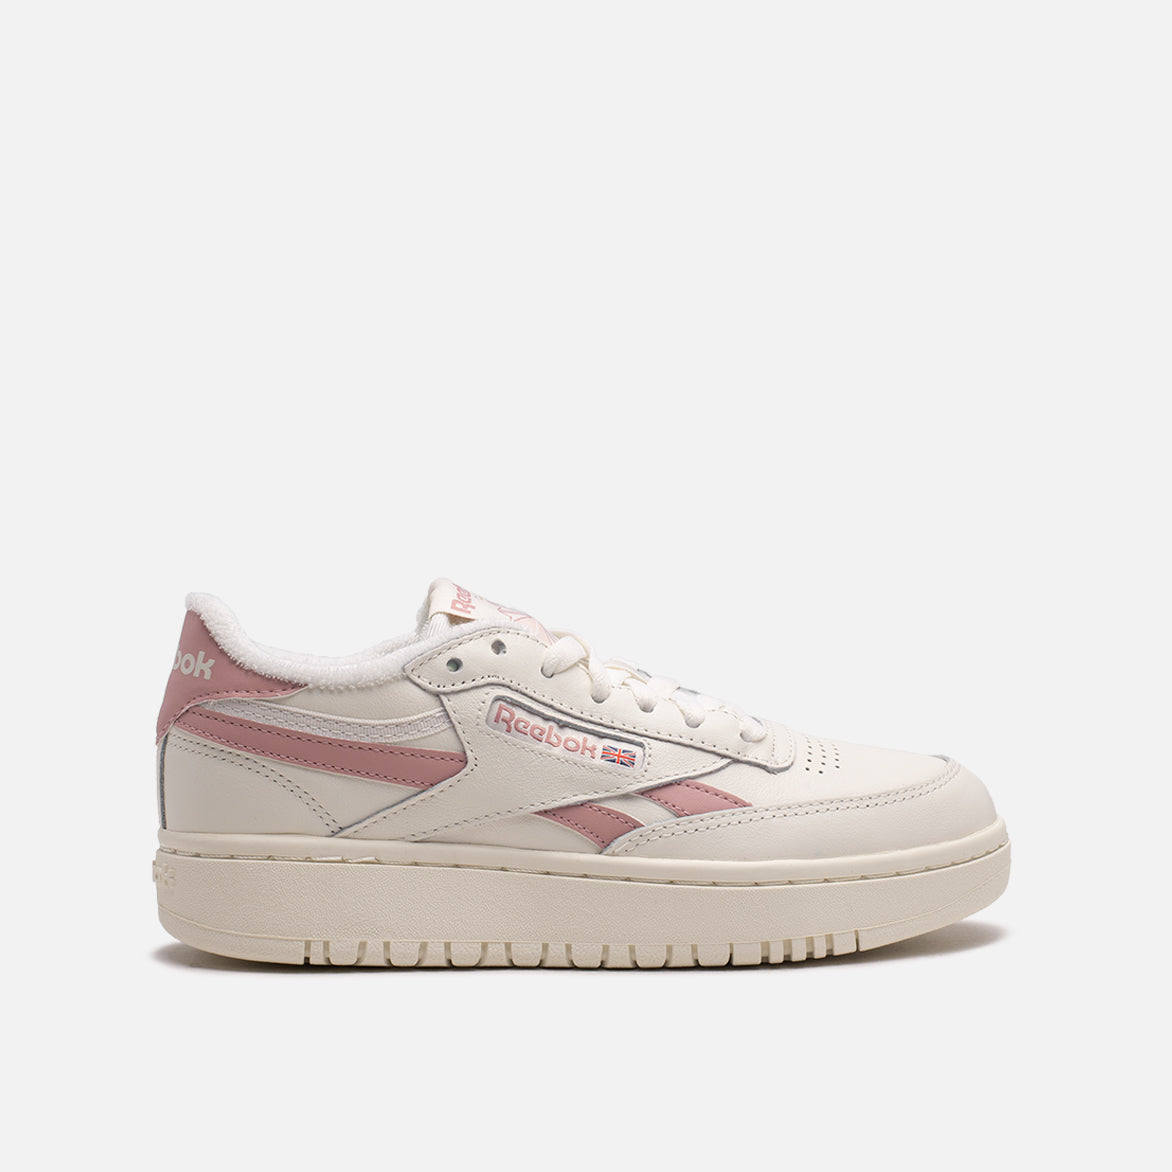 Reebok Club C Double Revenge Sneakers in White with Pink Detail